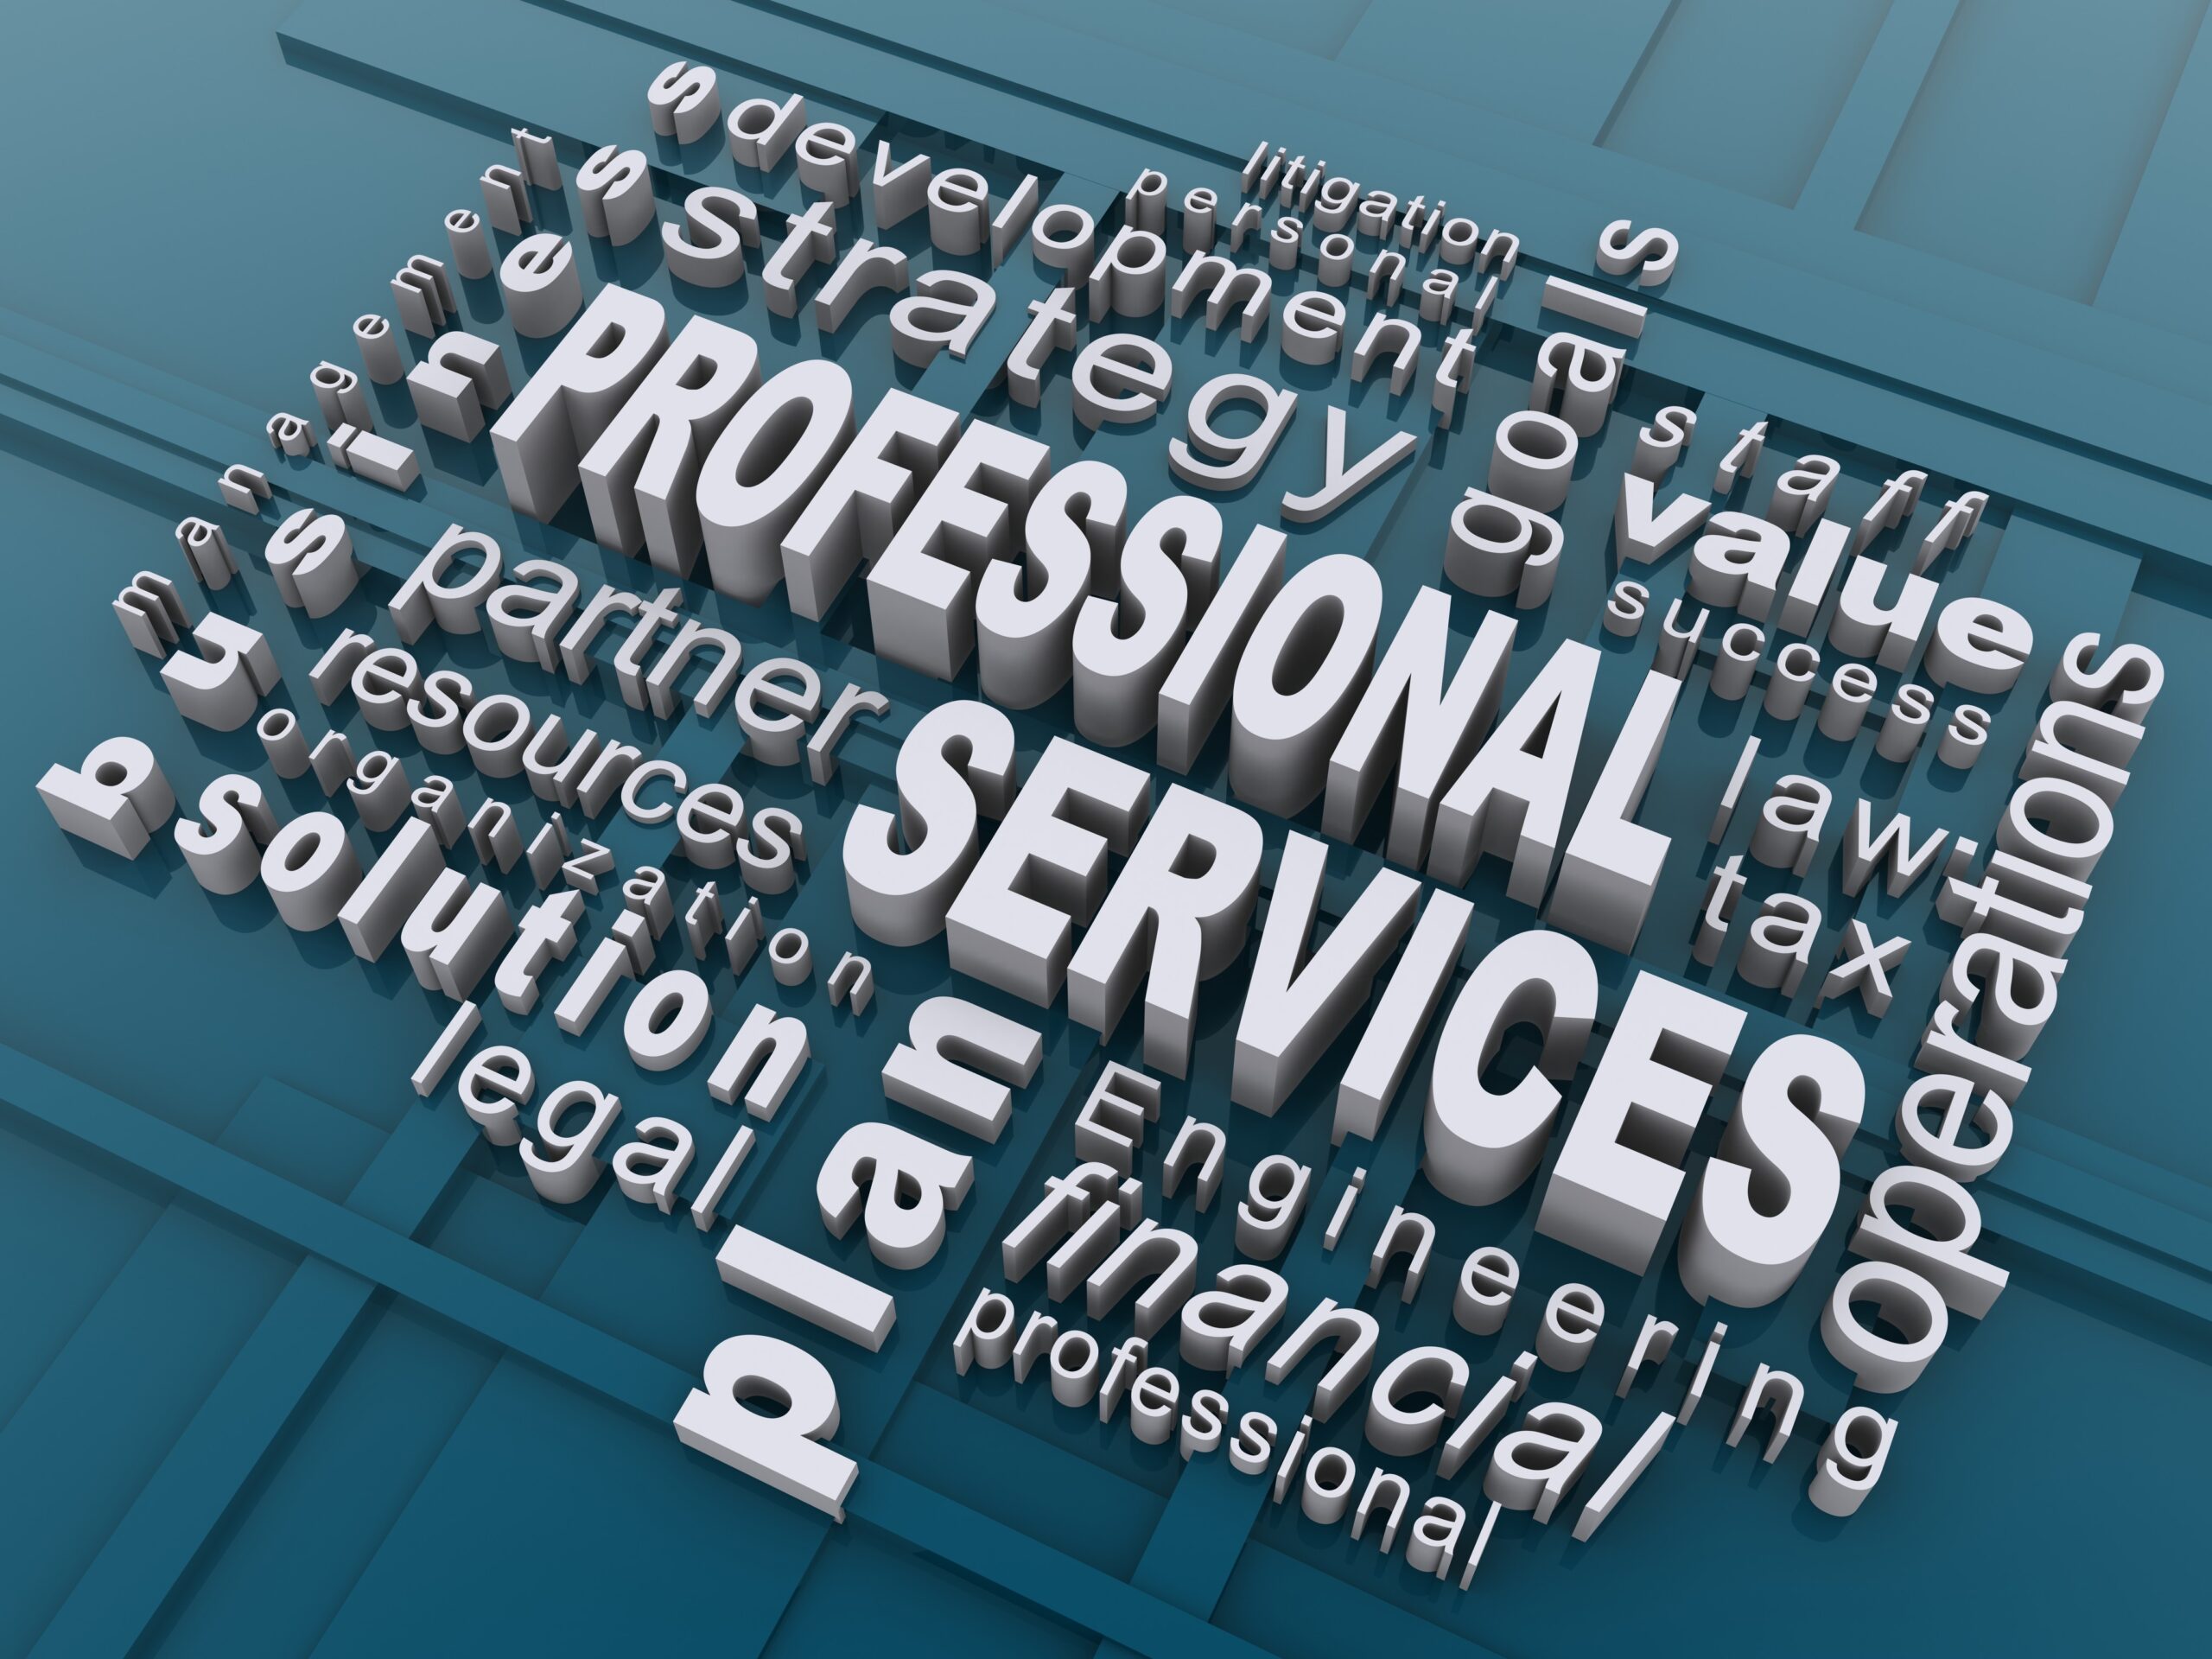 A word cloud with the Professional Services highlighted